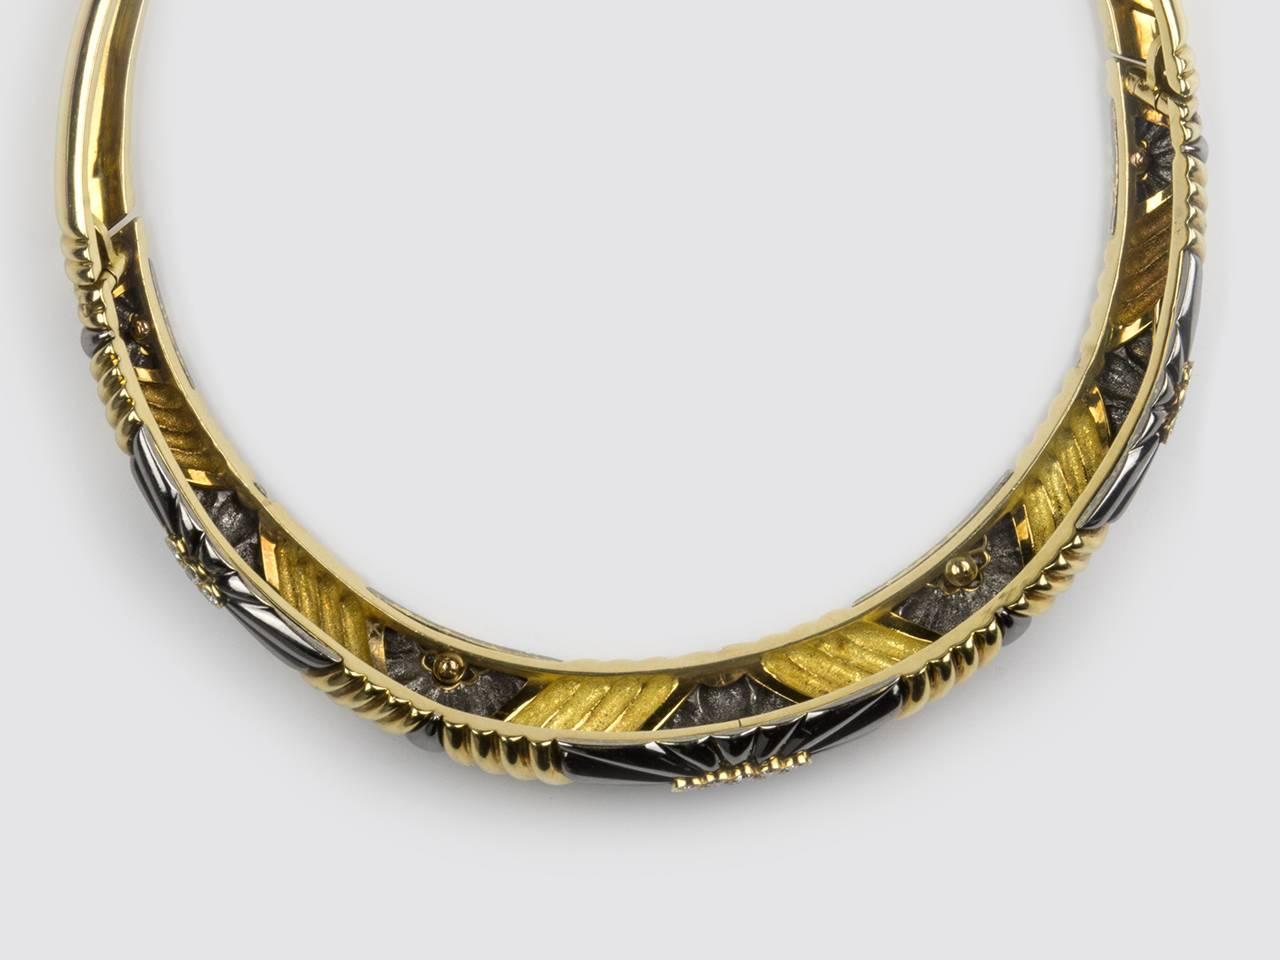 18k fluted gold collar in a chevron designe, set with diamonds. Signed CHAUMET.